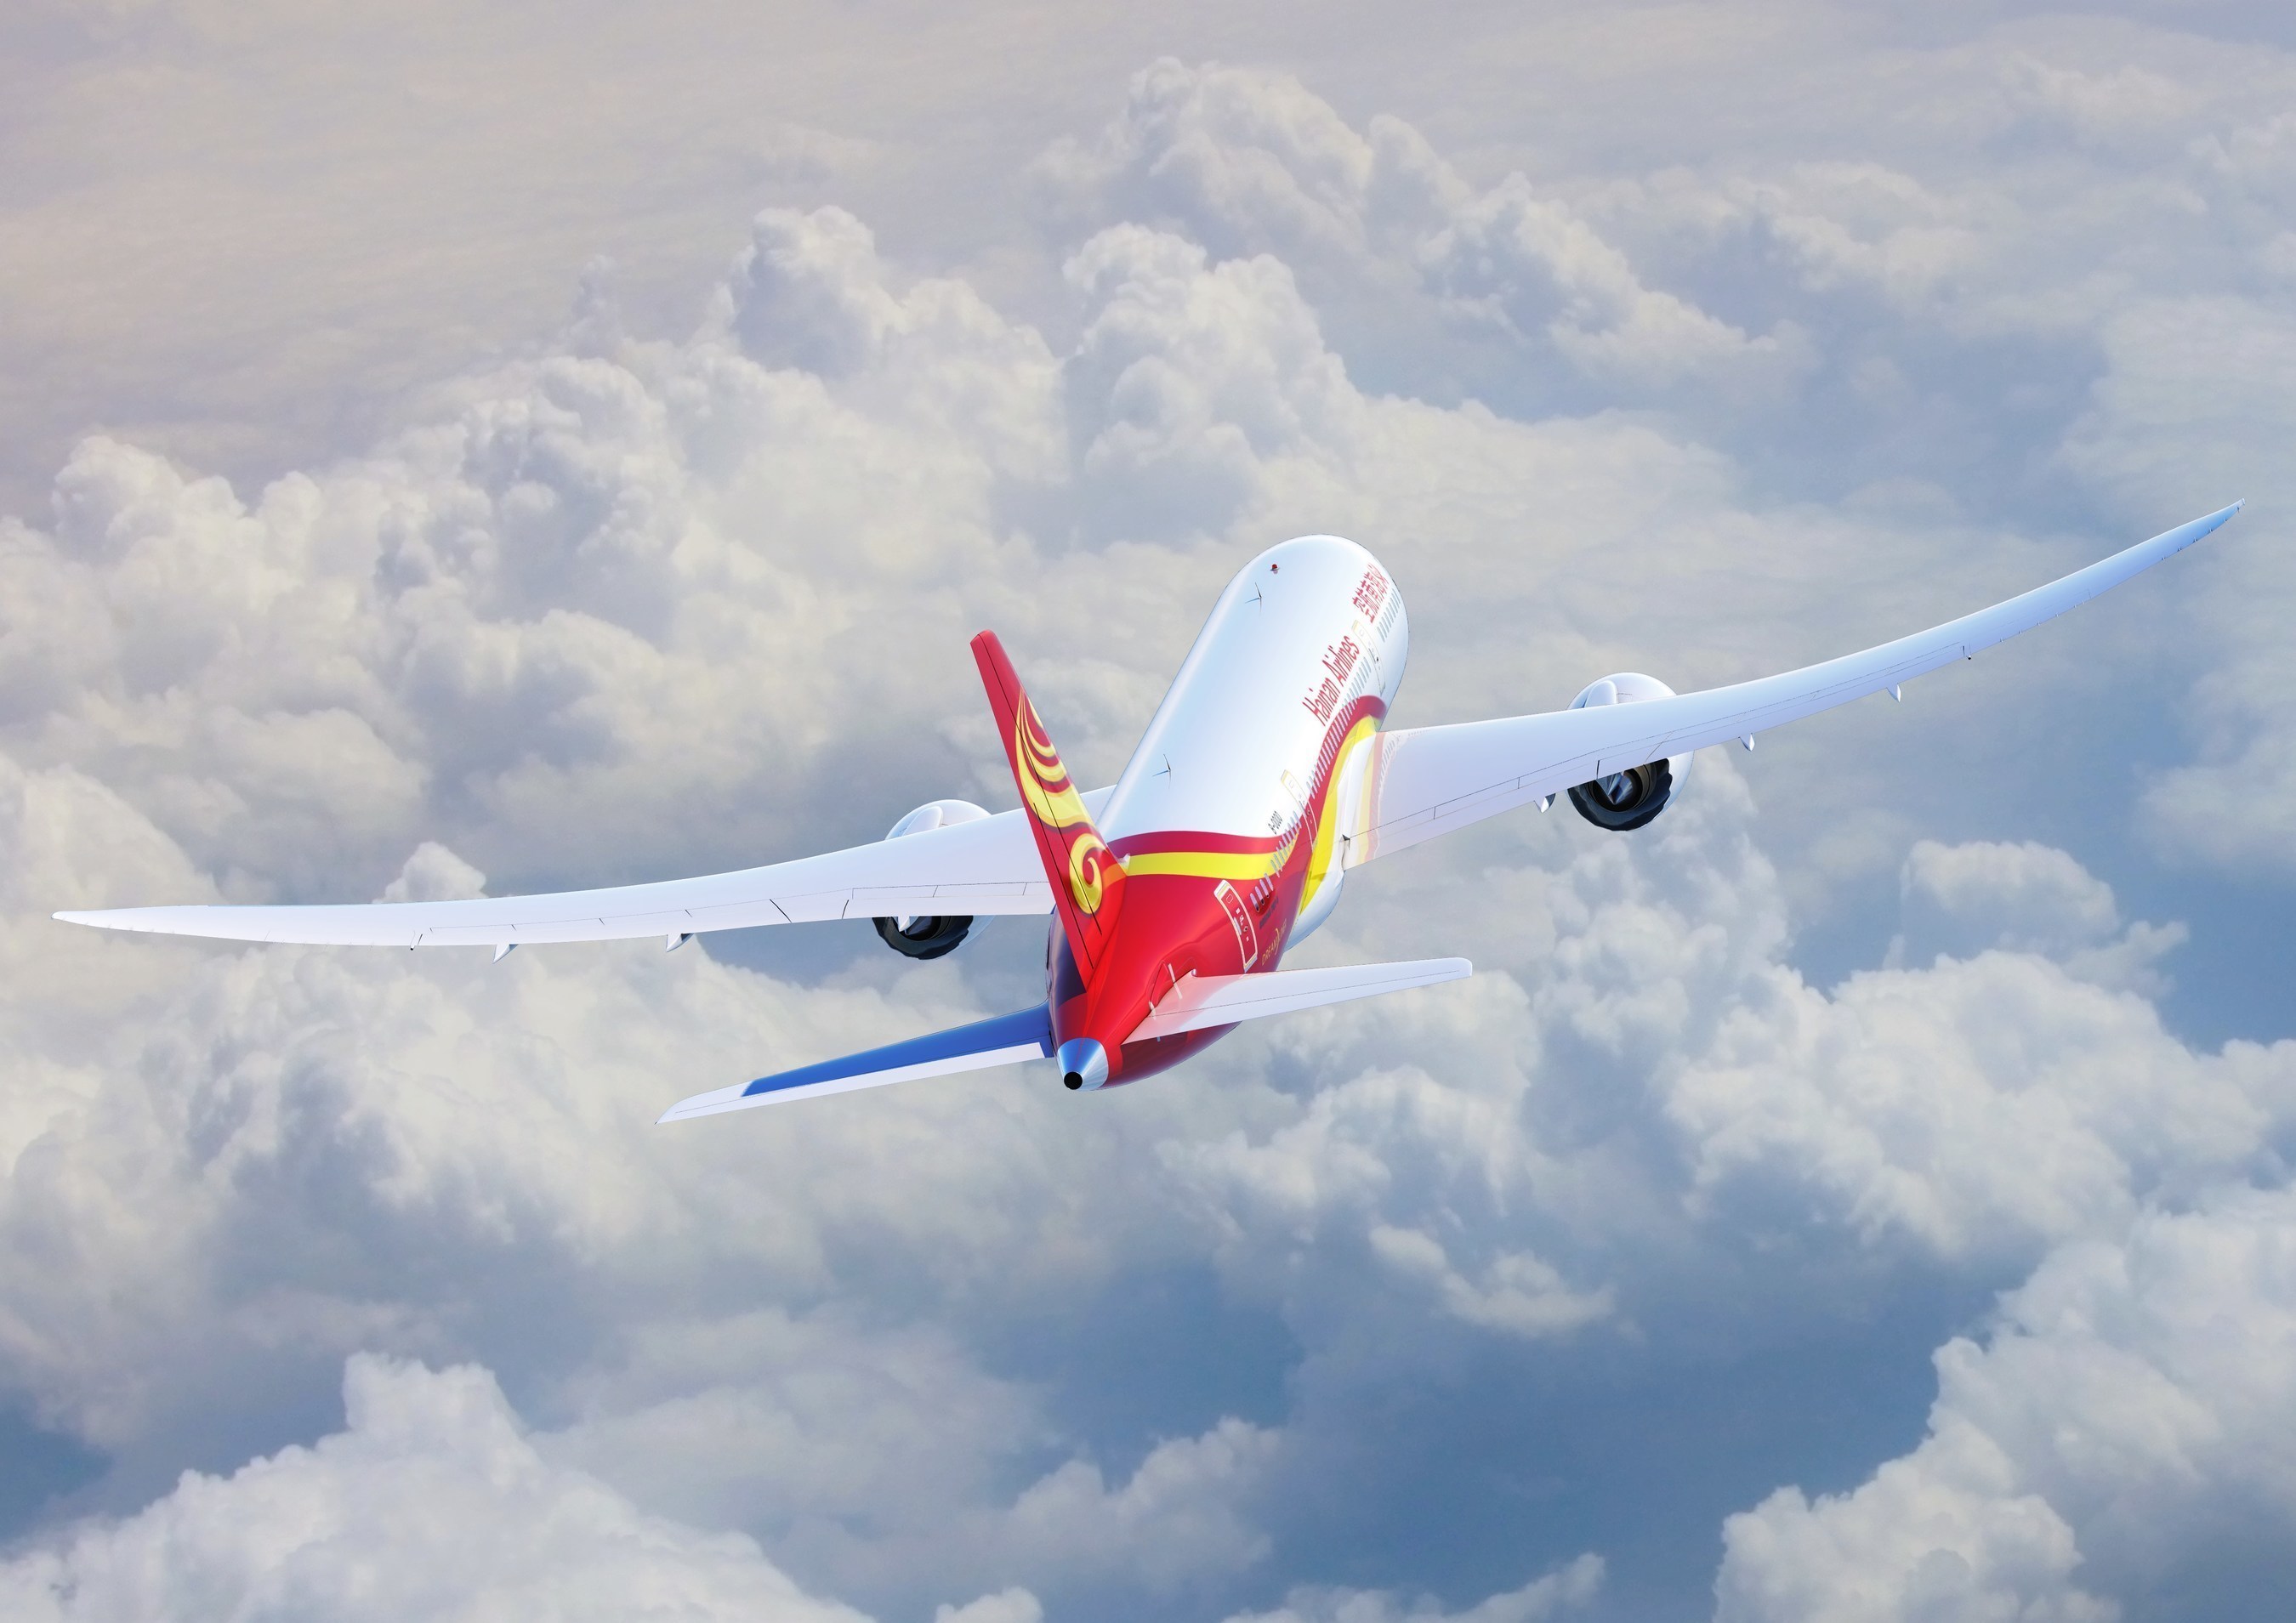 All Hainan flights between China and the United States feature the Boeing 787 Dreamliner, including new service between LAX and Changsha.